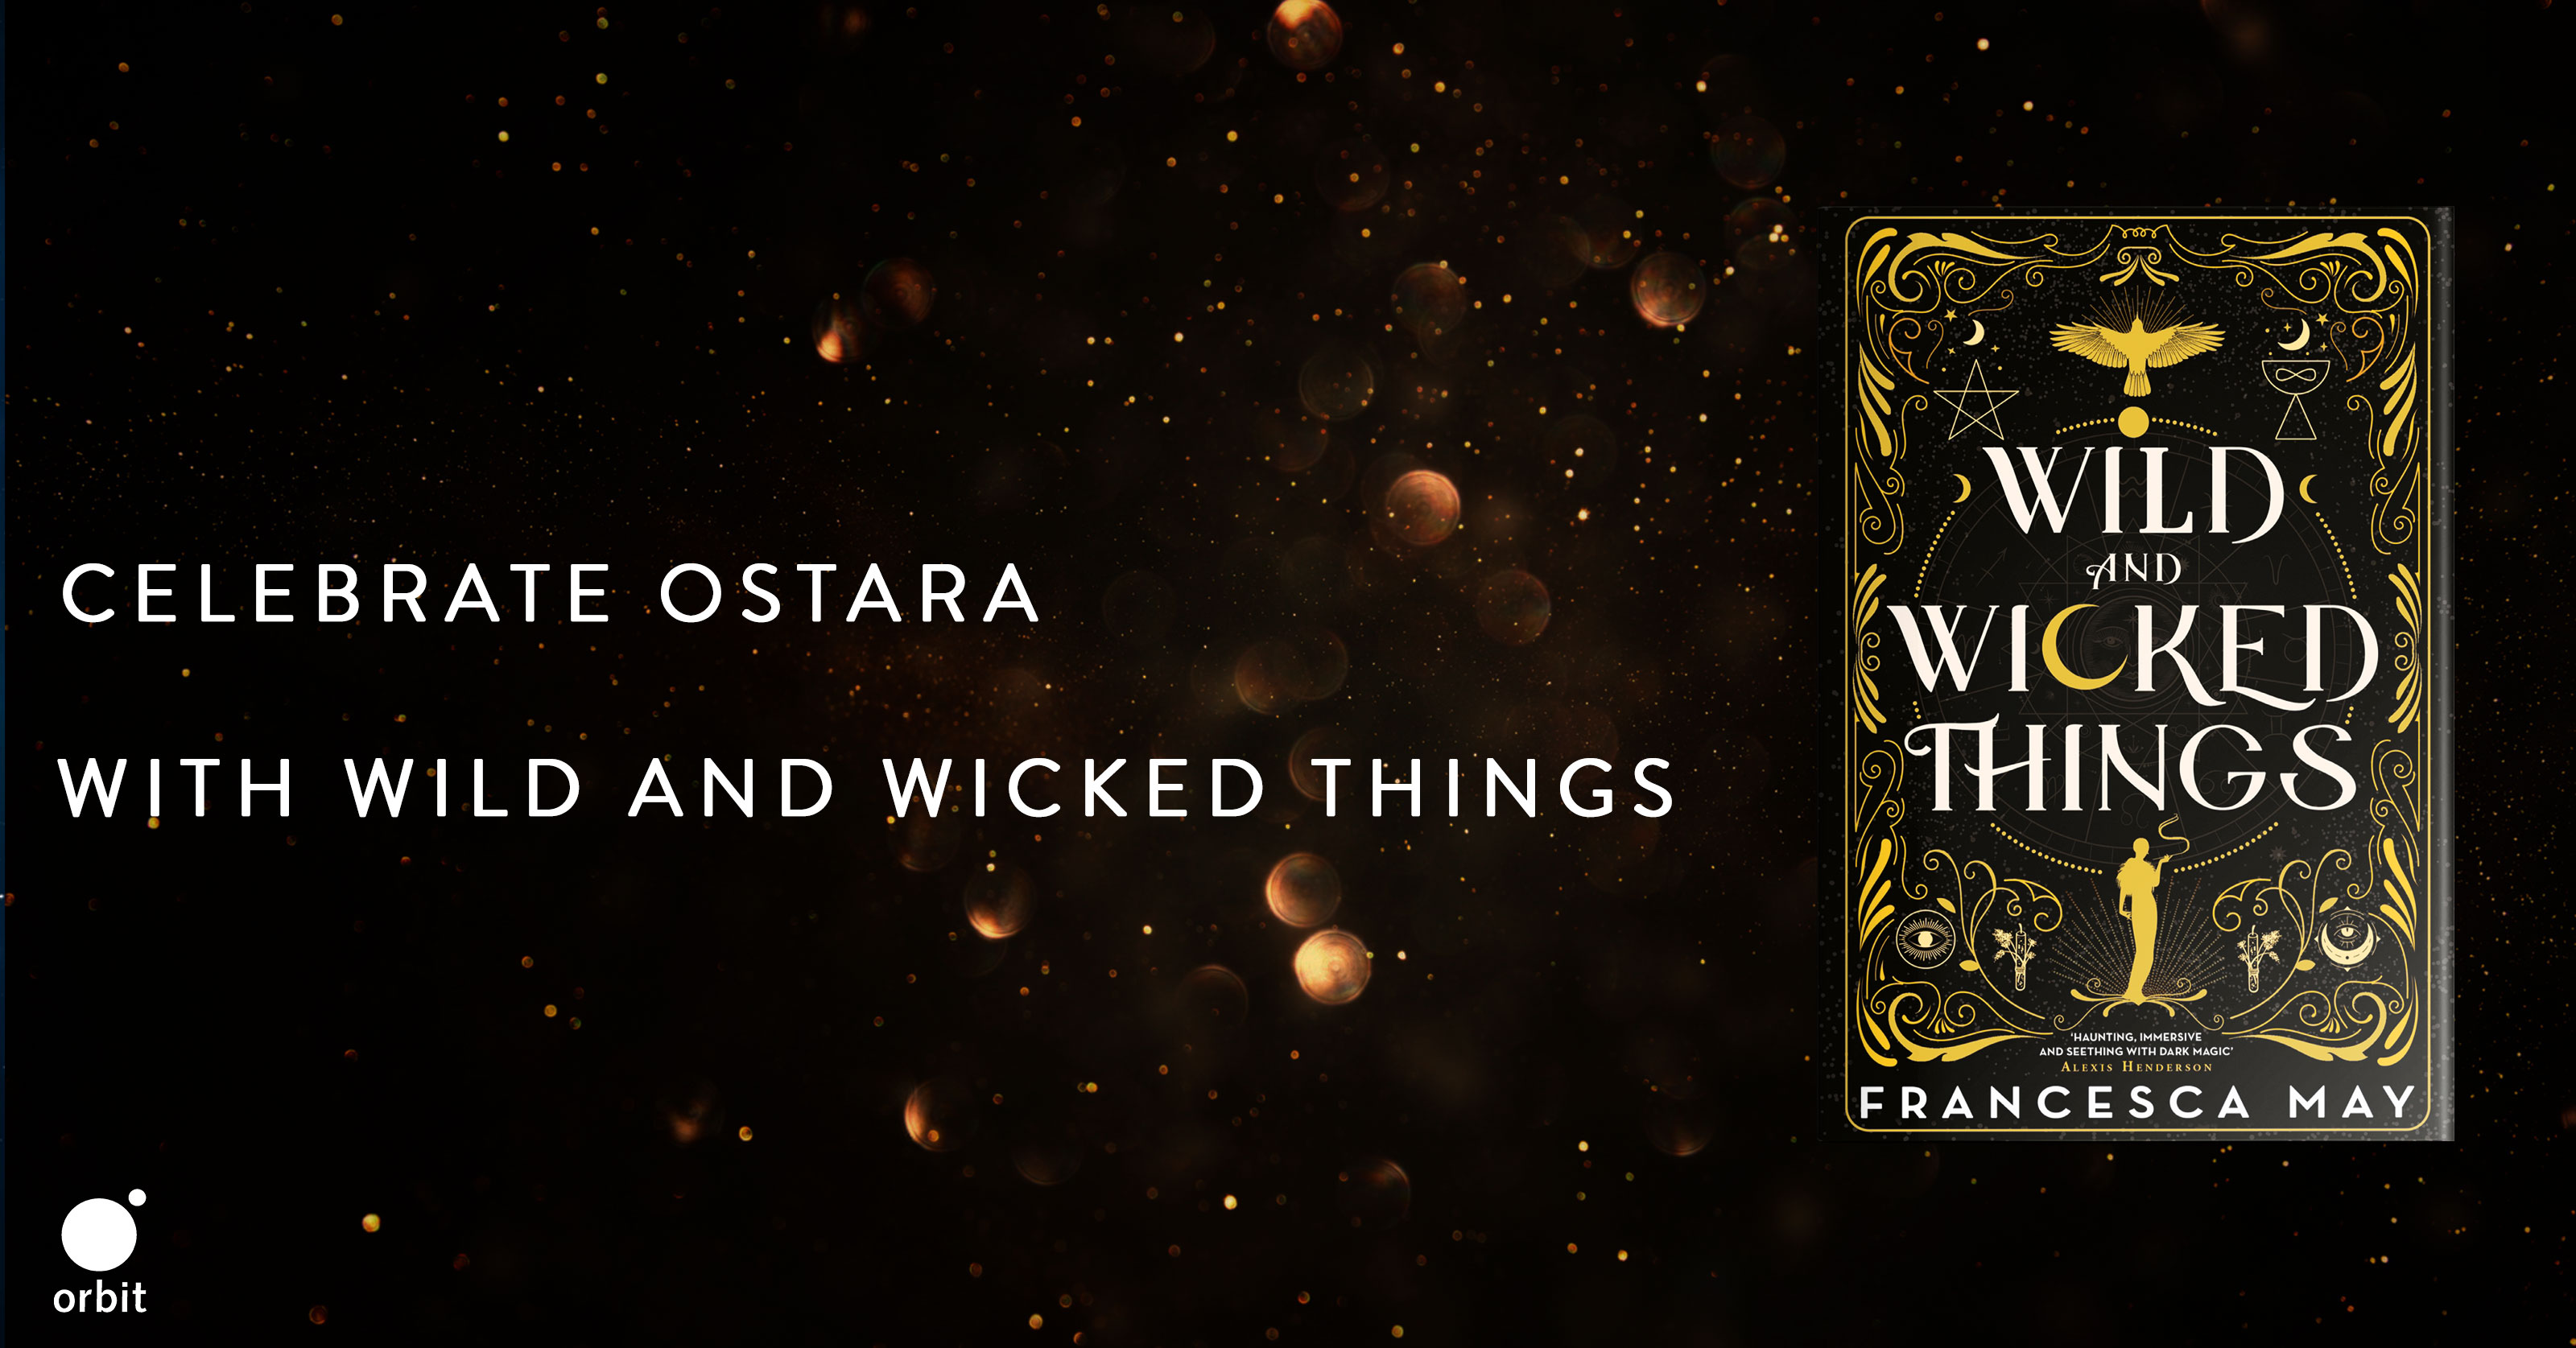 A short extract from Wild and Wicked Things | Hachette UK